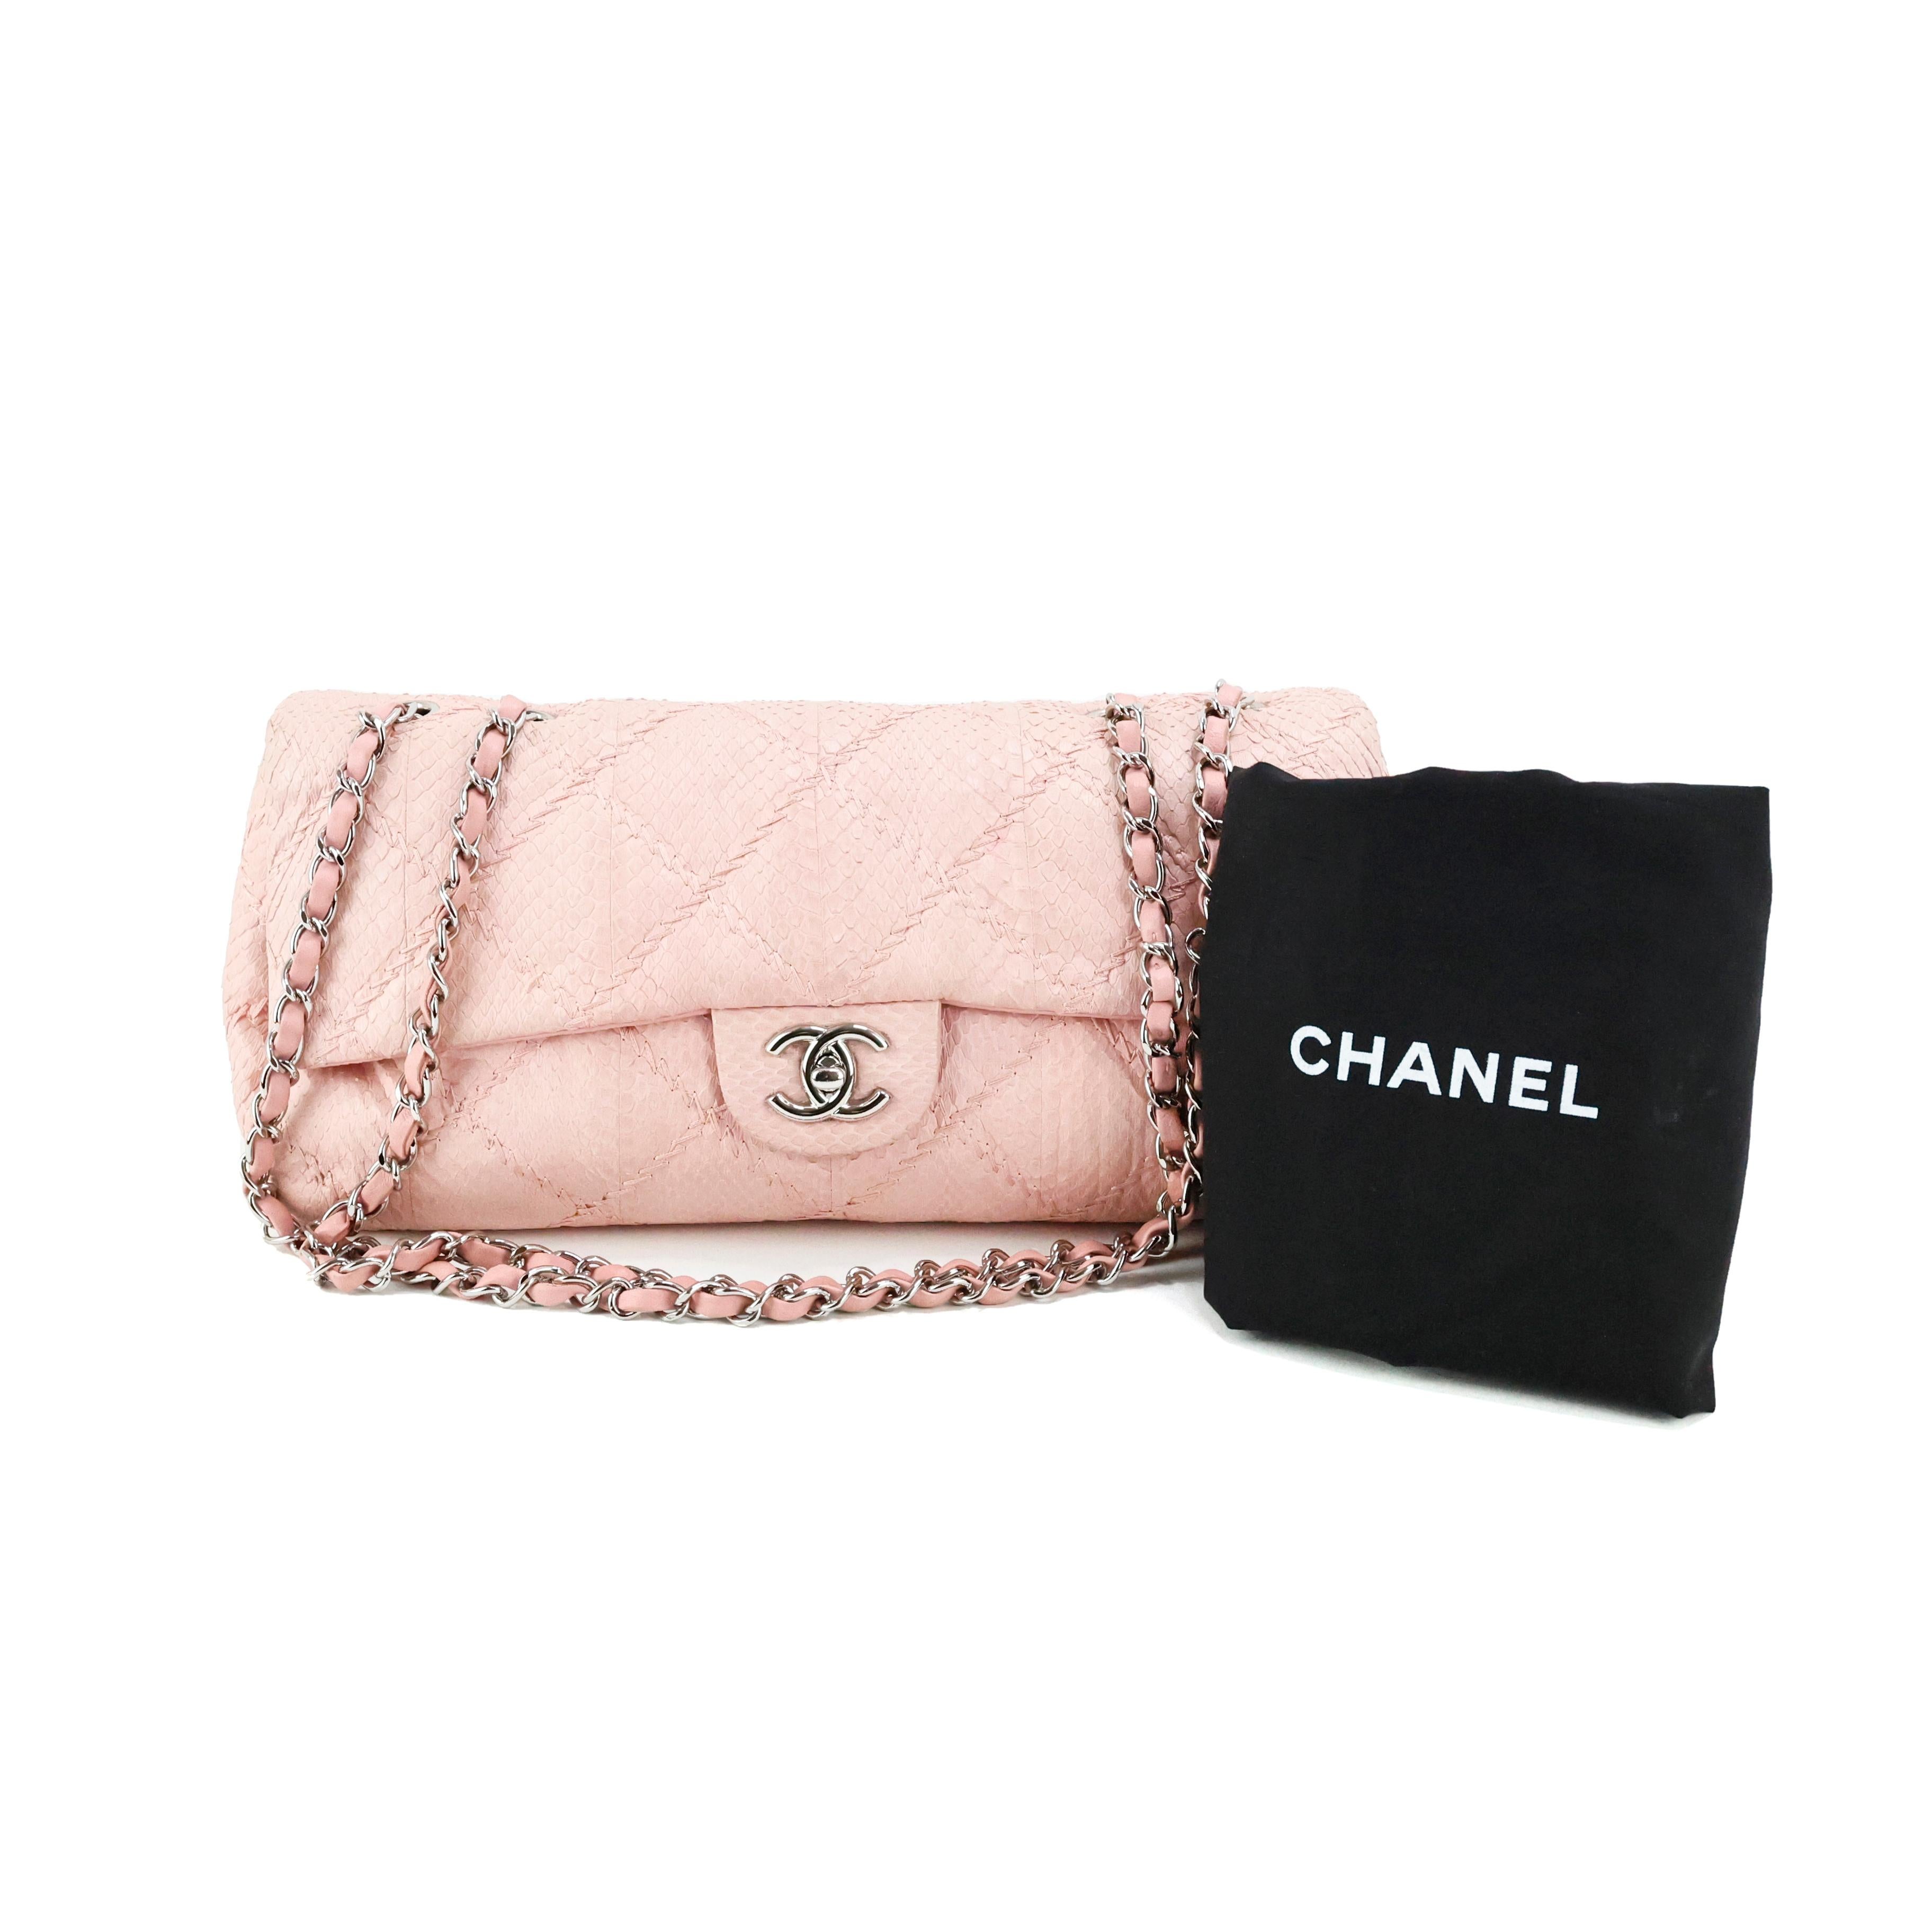 Women's Chanel Classic Flap Bag in light pink Python leather For Sale